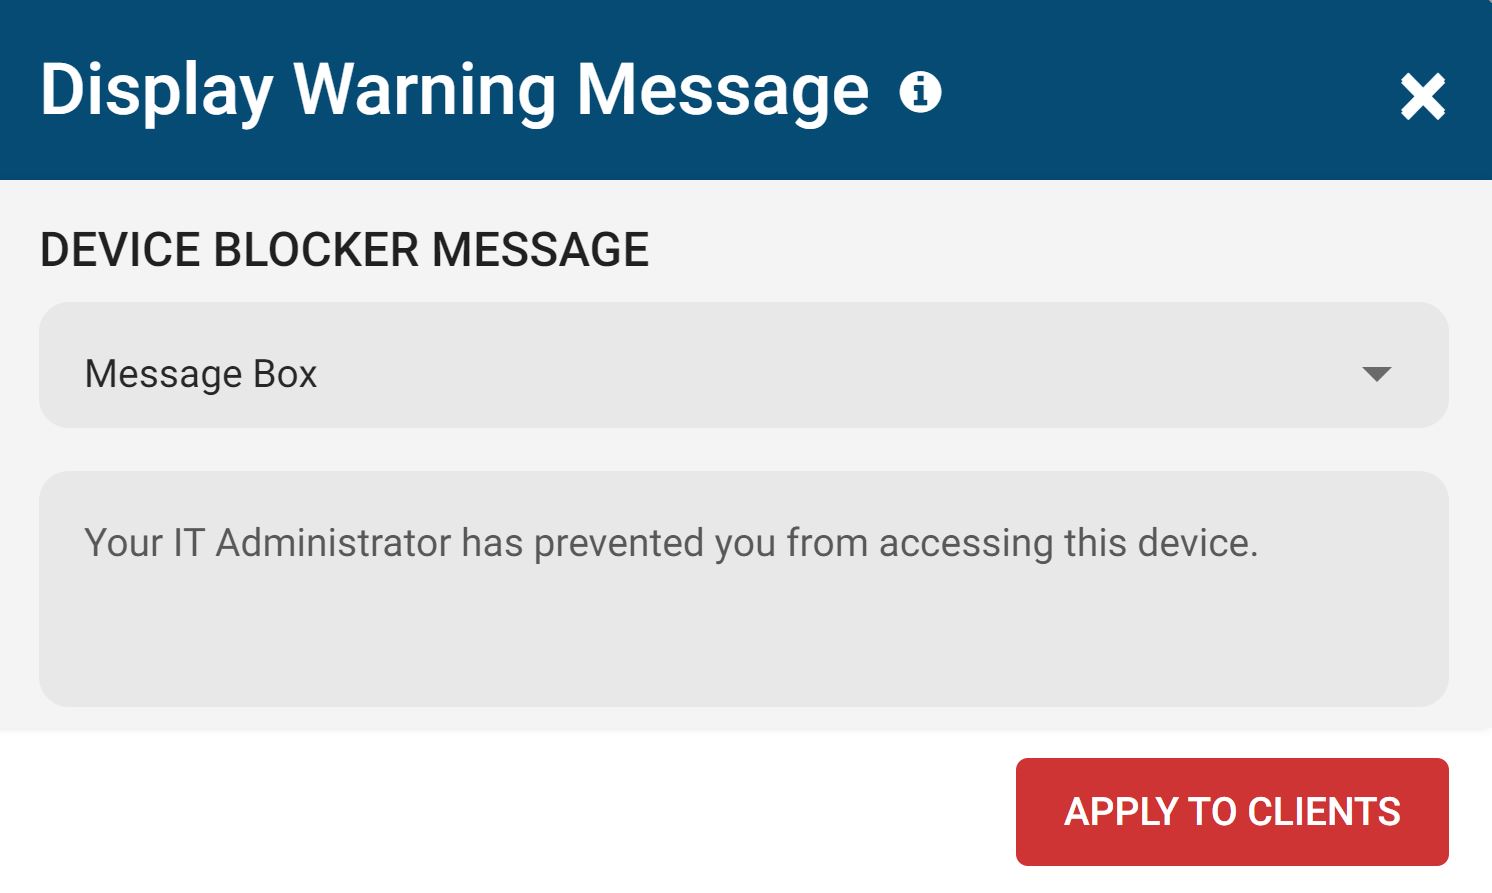 Screenshot of AccessPatrol's custom warning message box. The message states "Your IT Administrator has prevented you from accessing this device."